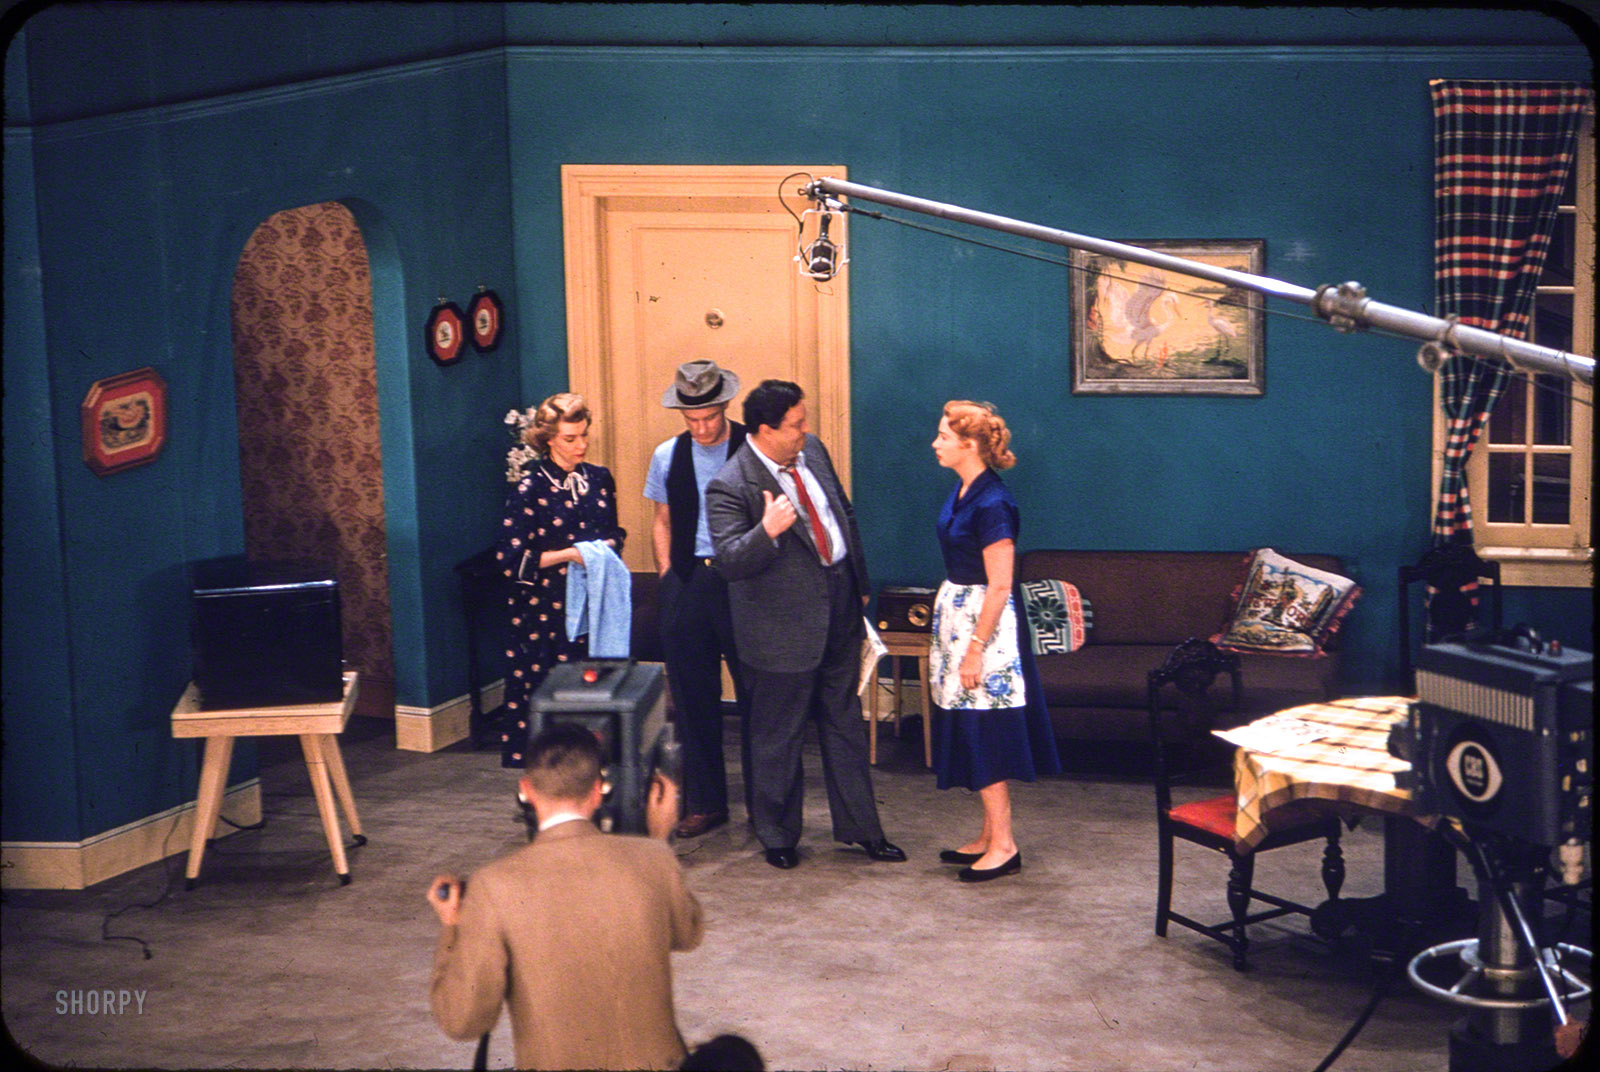 April 1955. "Art Carney, Jackie Gleason, Audrey Meadows, and Joyce Randolph performing skit on television sound stage for The Honeymooners." Color transparency from unpublished photos by Arthur Rothstein and Douglas Jones for the Look magazine assignment "Gleason's Pal Carney." View full size.